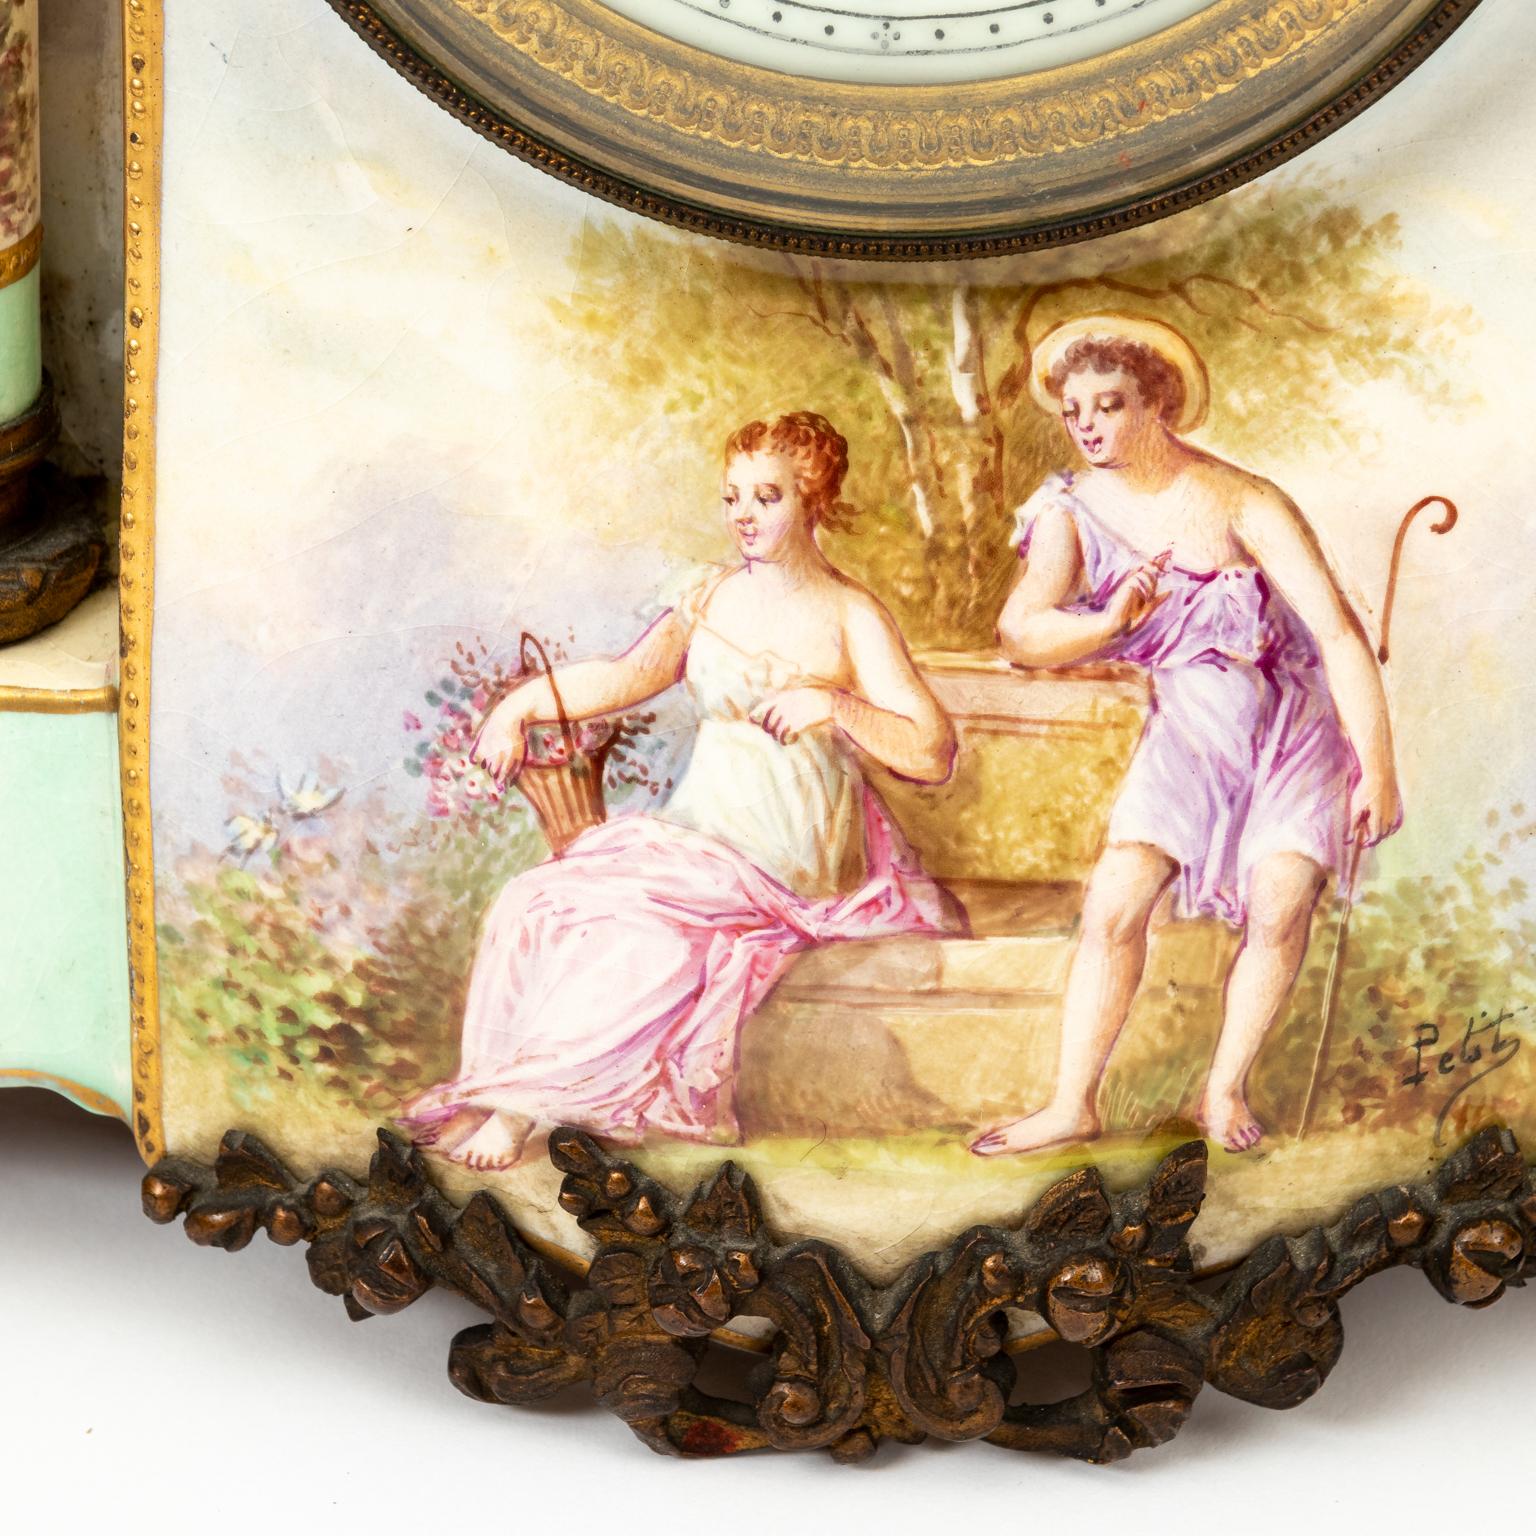 Hand painted porcelain French mantel clock signed by artists, circa 1880s. The piece is decorated and painted with floral details throughout along with the depiction of a two figures on the front. It comes with a key and pendulum. Please note of